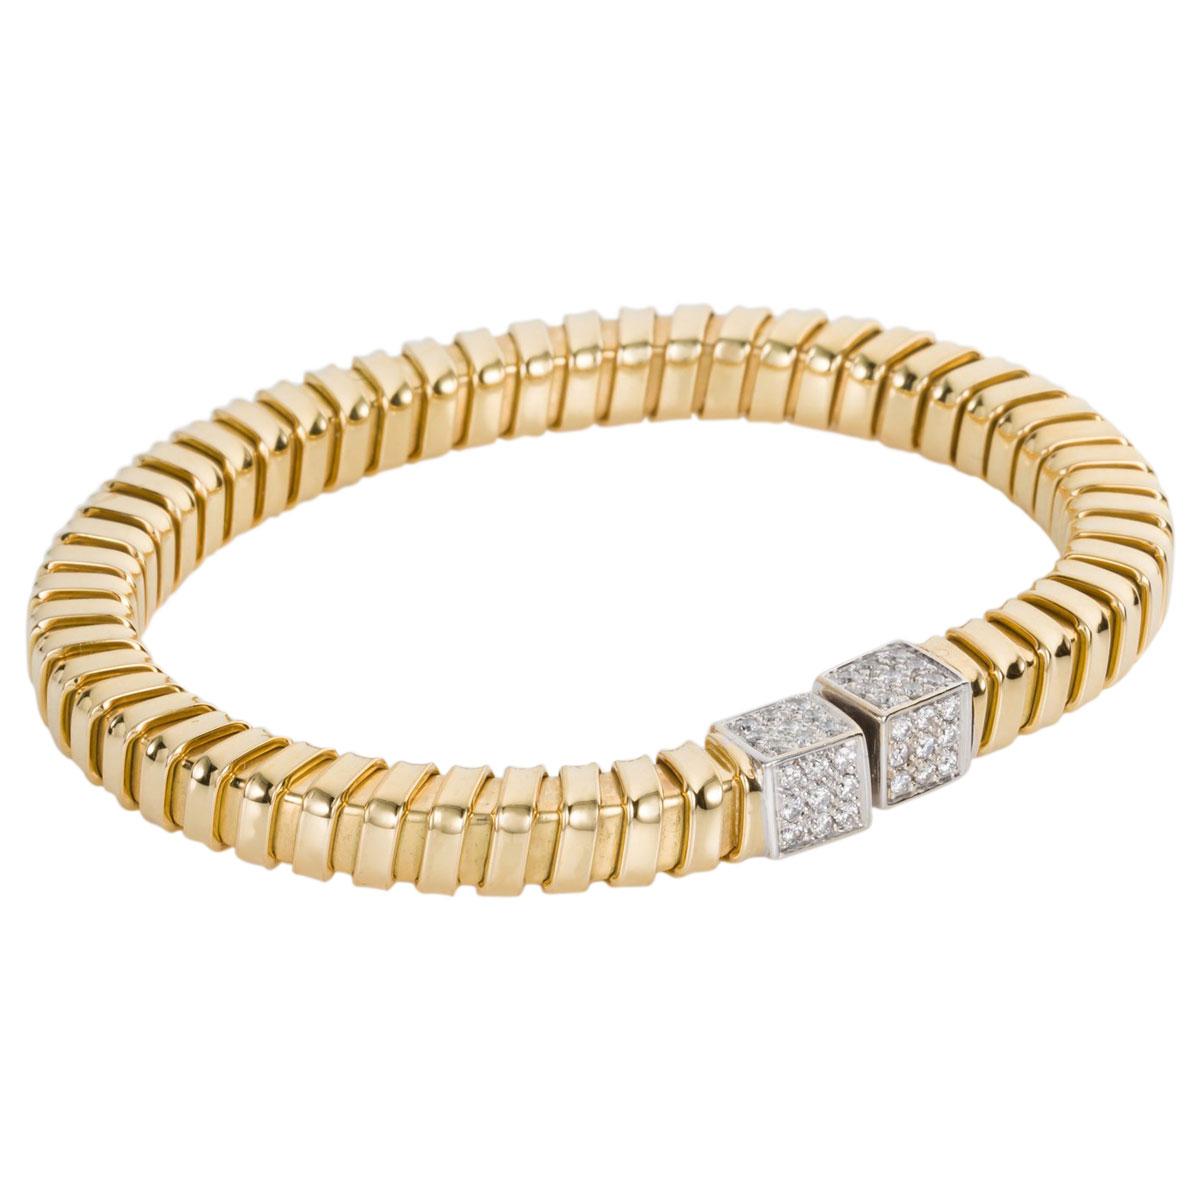 Carlo Weingrill, a name synomous with style and quality. The Italian jewellery house that designs the most desirable gold jewels and this bracelet is no exception. Crafted from 18k yellow gold with an inner steel spring the tubogas style sits